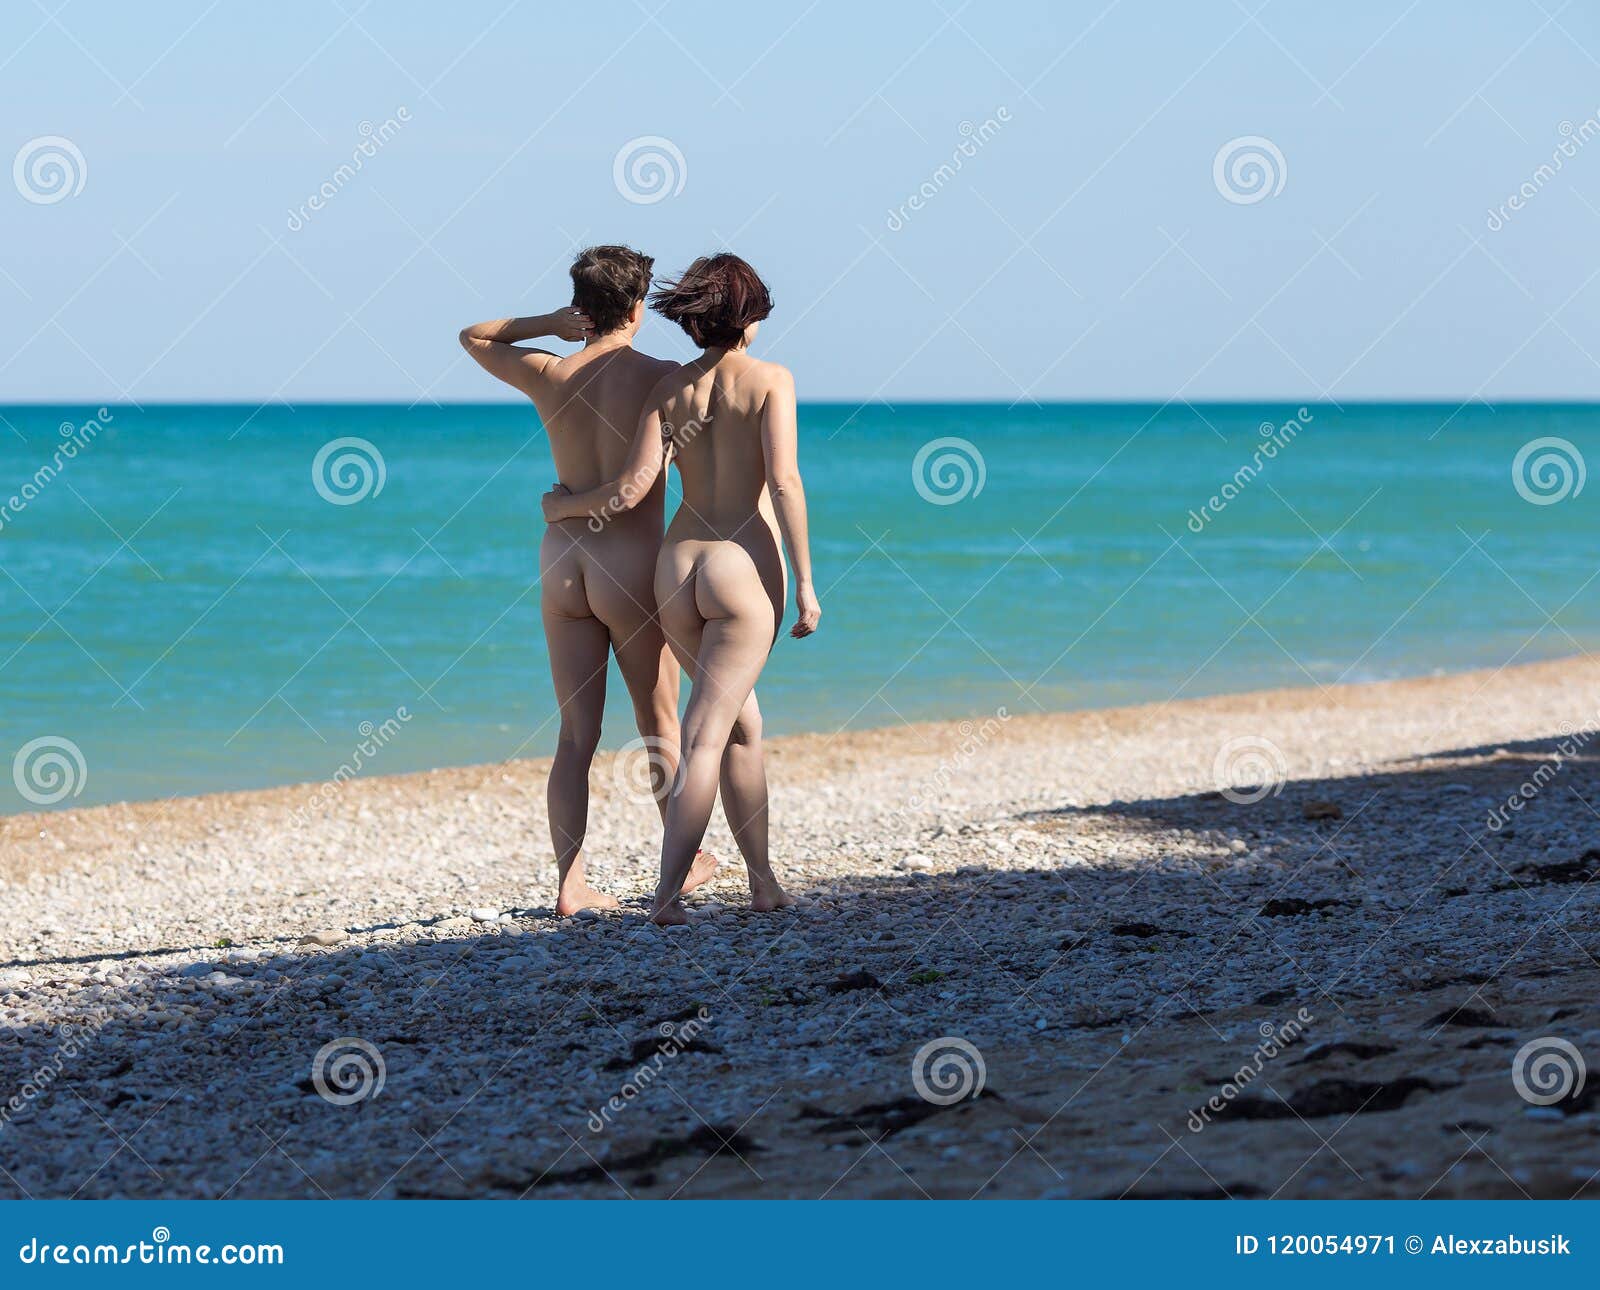 destiney williams recommends naked beach couples pics pic